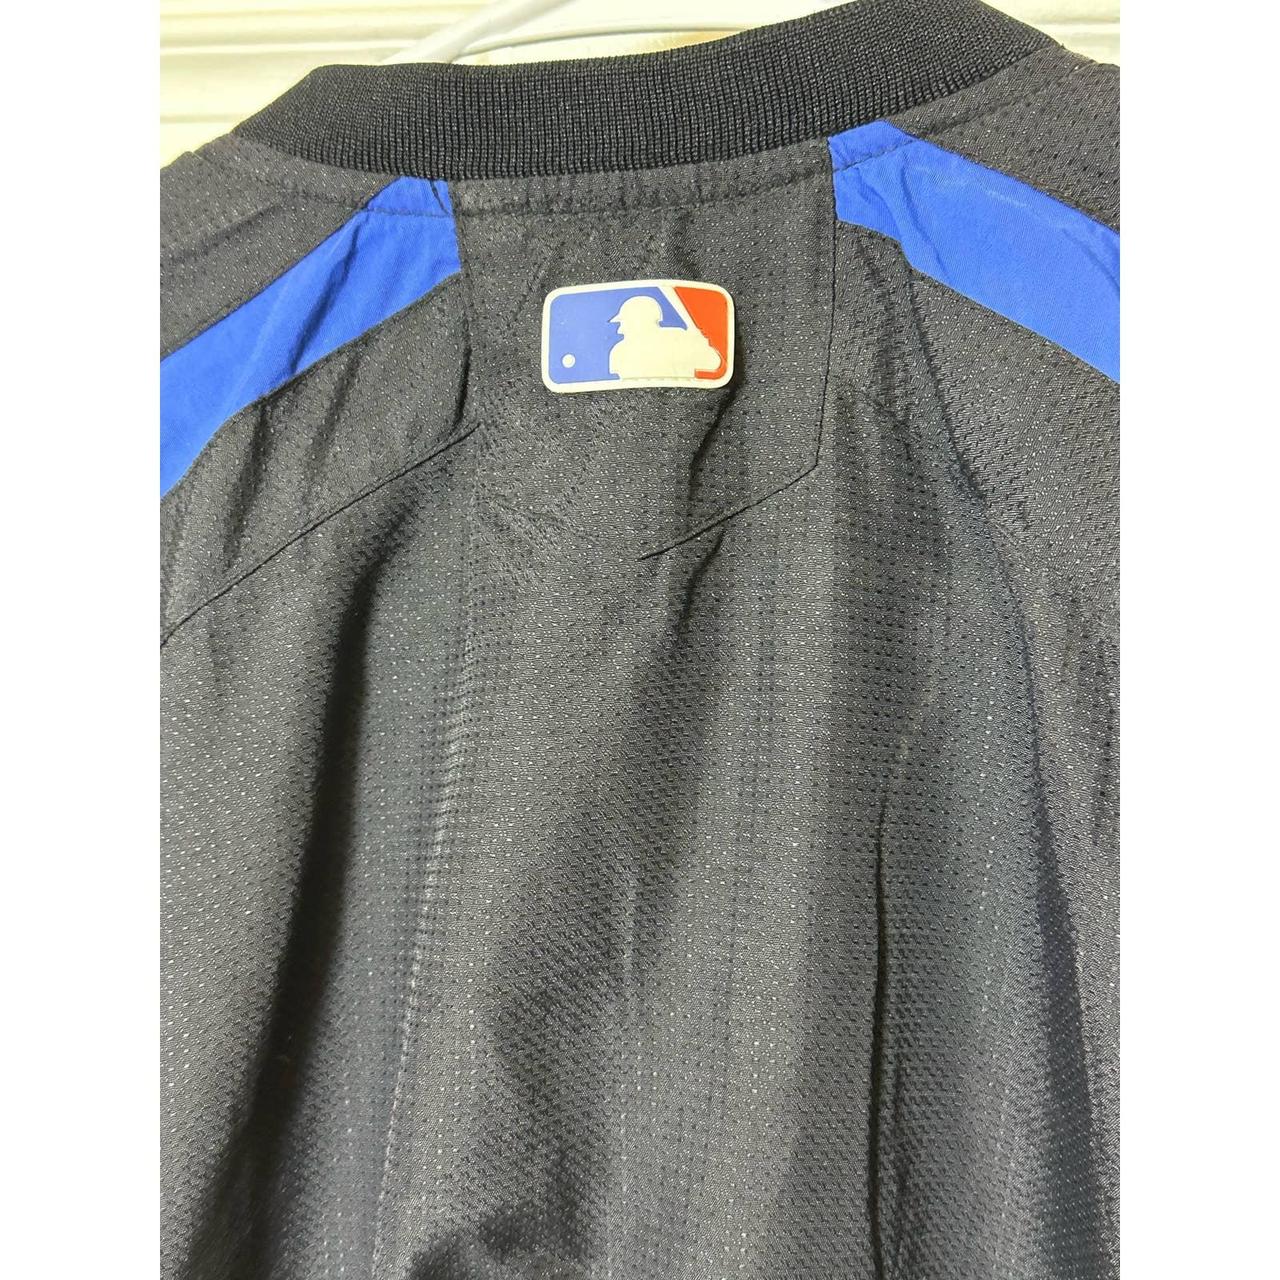 Authentic Majestic Mens L MLB NY Mets Dugout - Depop